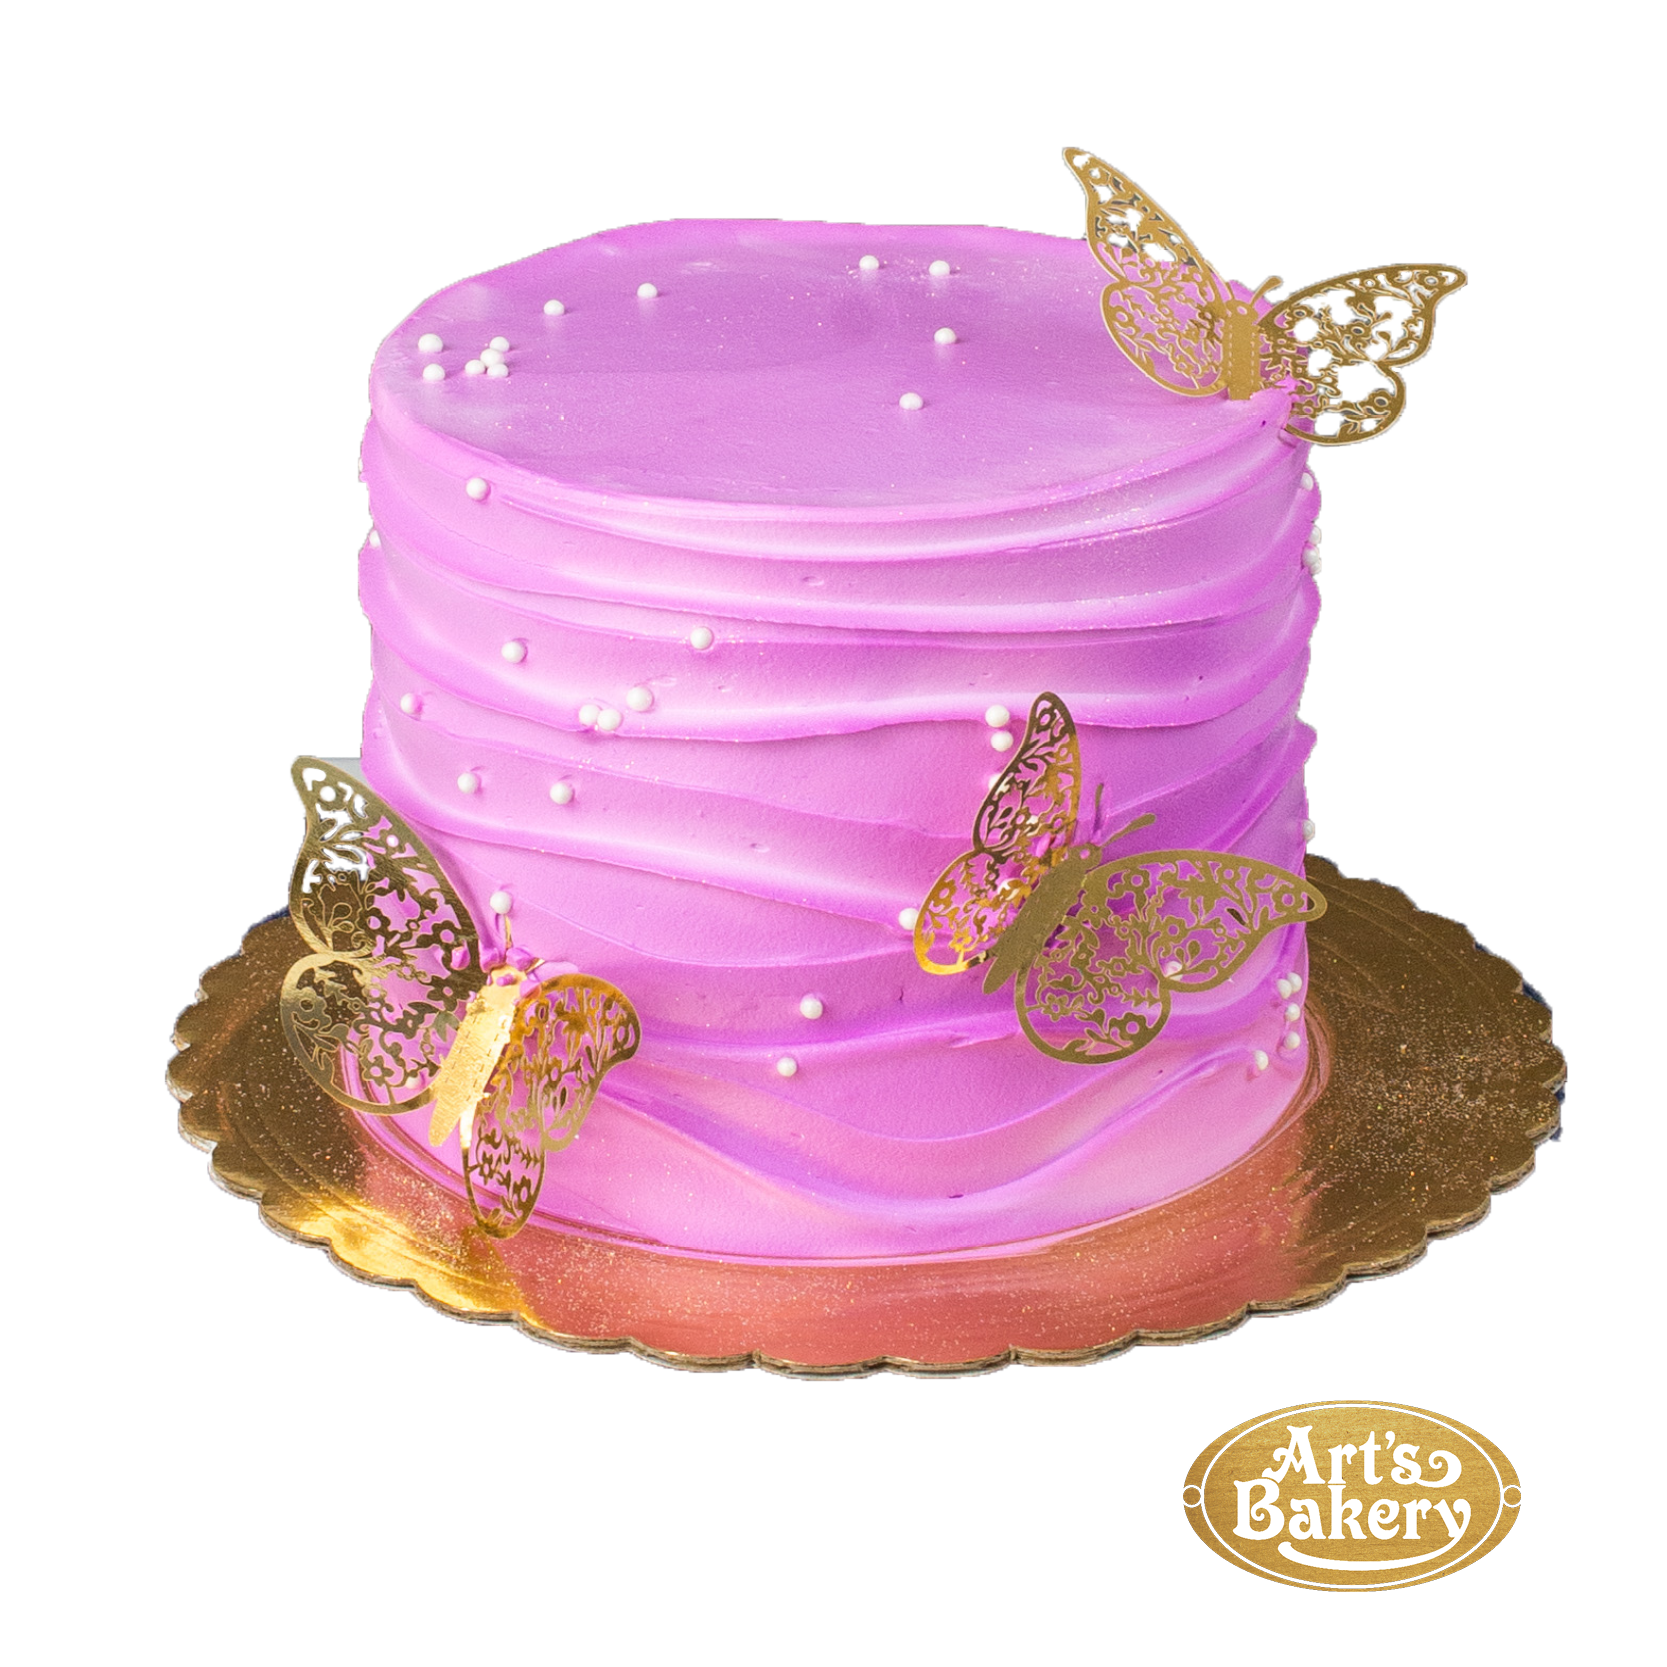 140 Wafer Paper Cakes and Rice Paper Art ideas  wafer paper cake, cake  decorating, paper cake